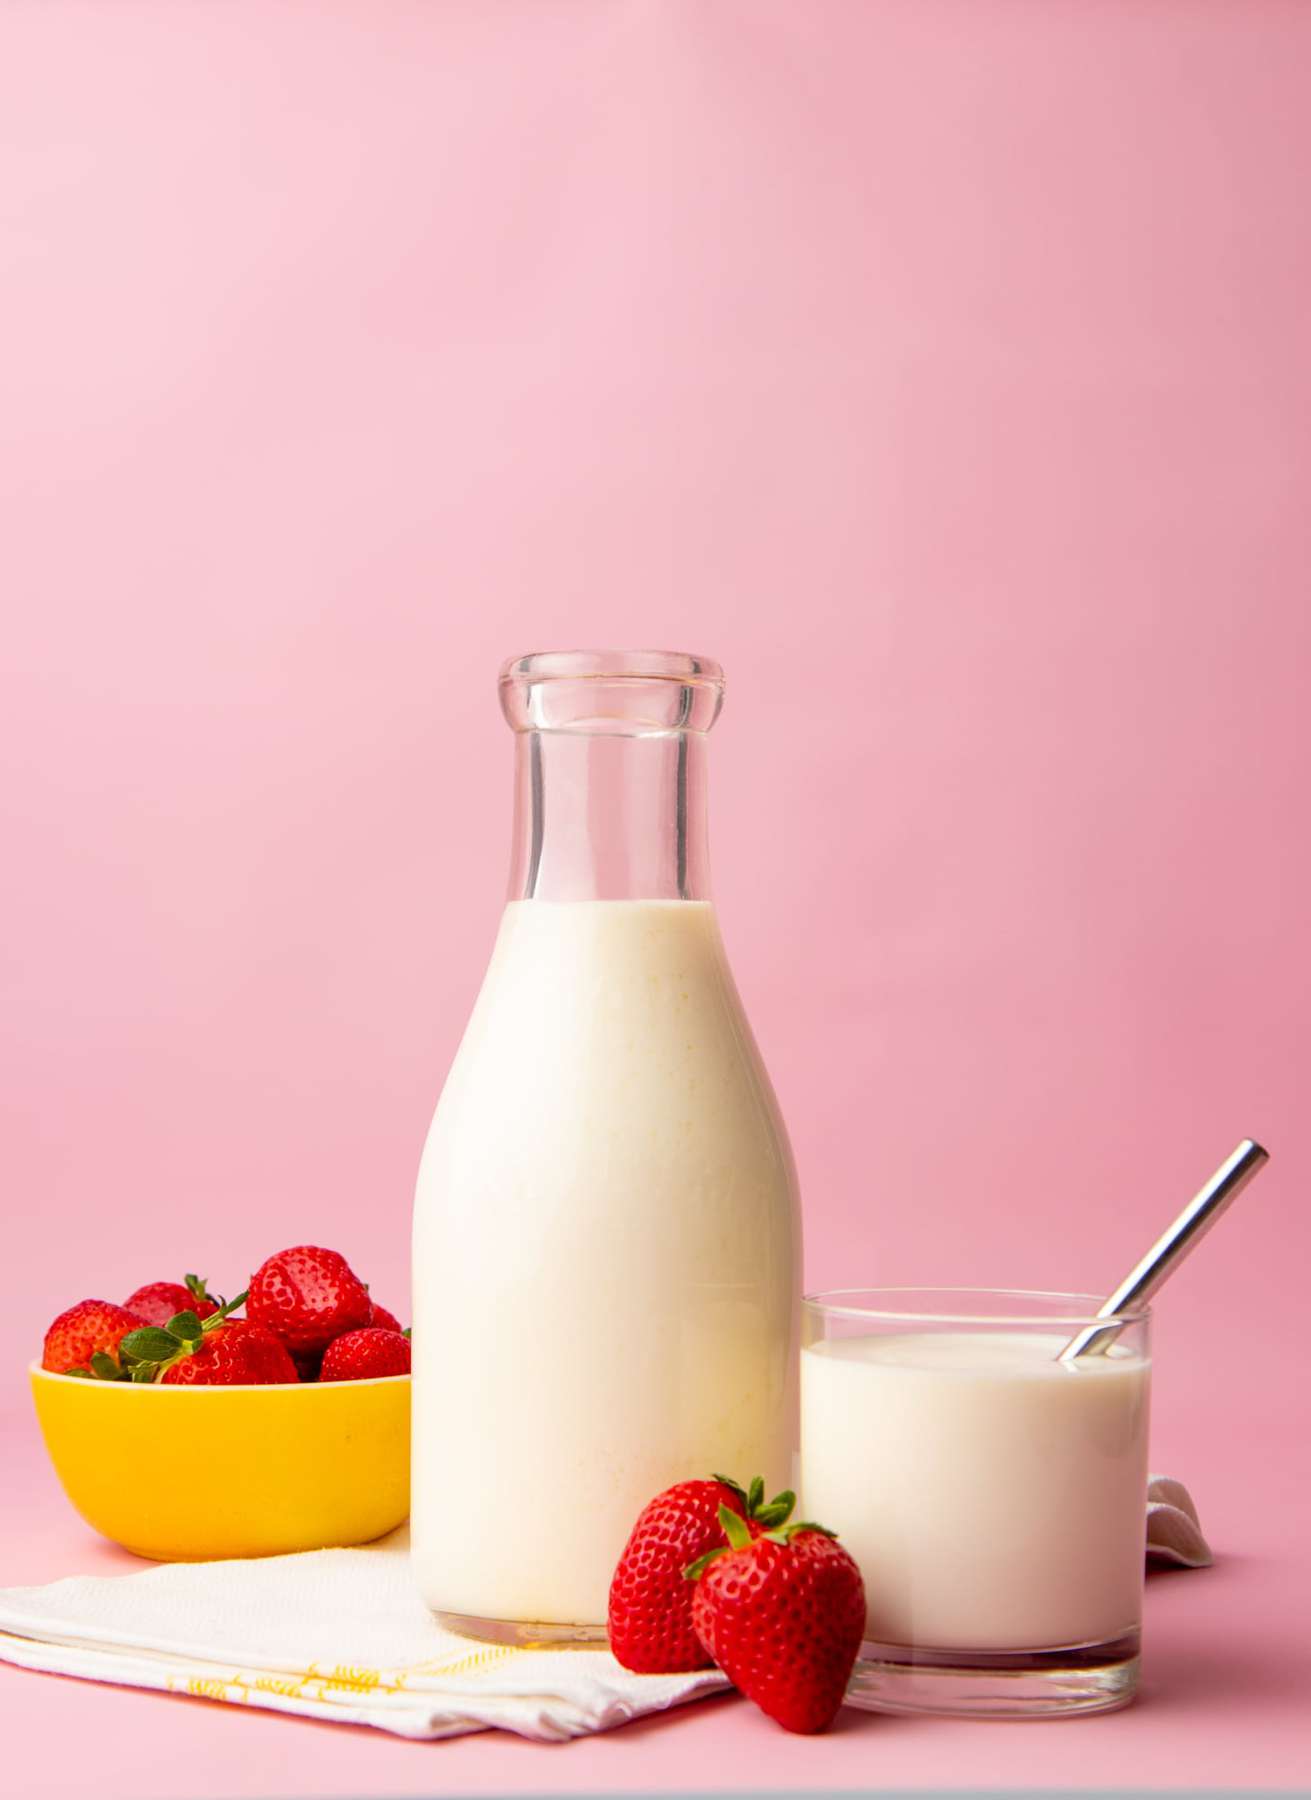 A glass carafe filled with homemade kefir sits on a linen kitchen towel with a full tumbler and a bowl of fresh strawberries on either side of it.